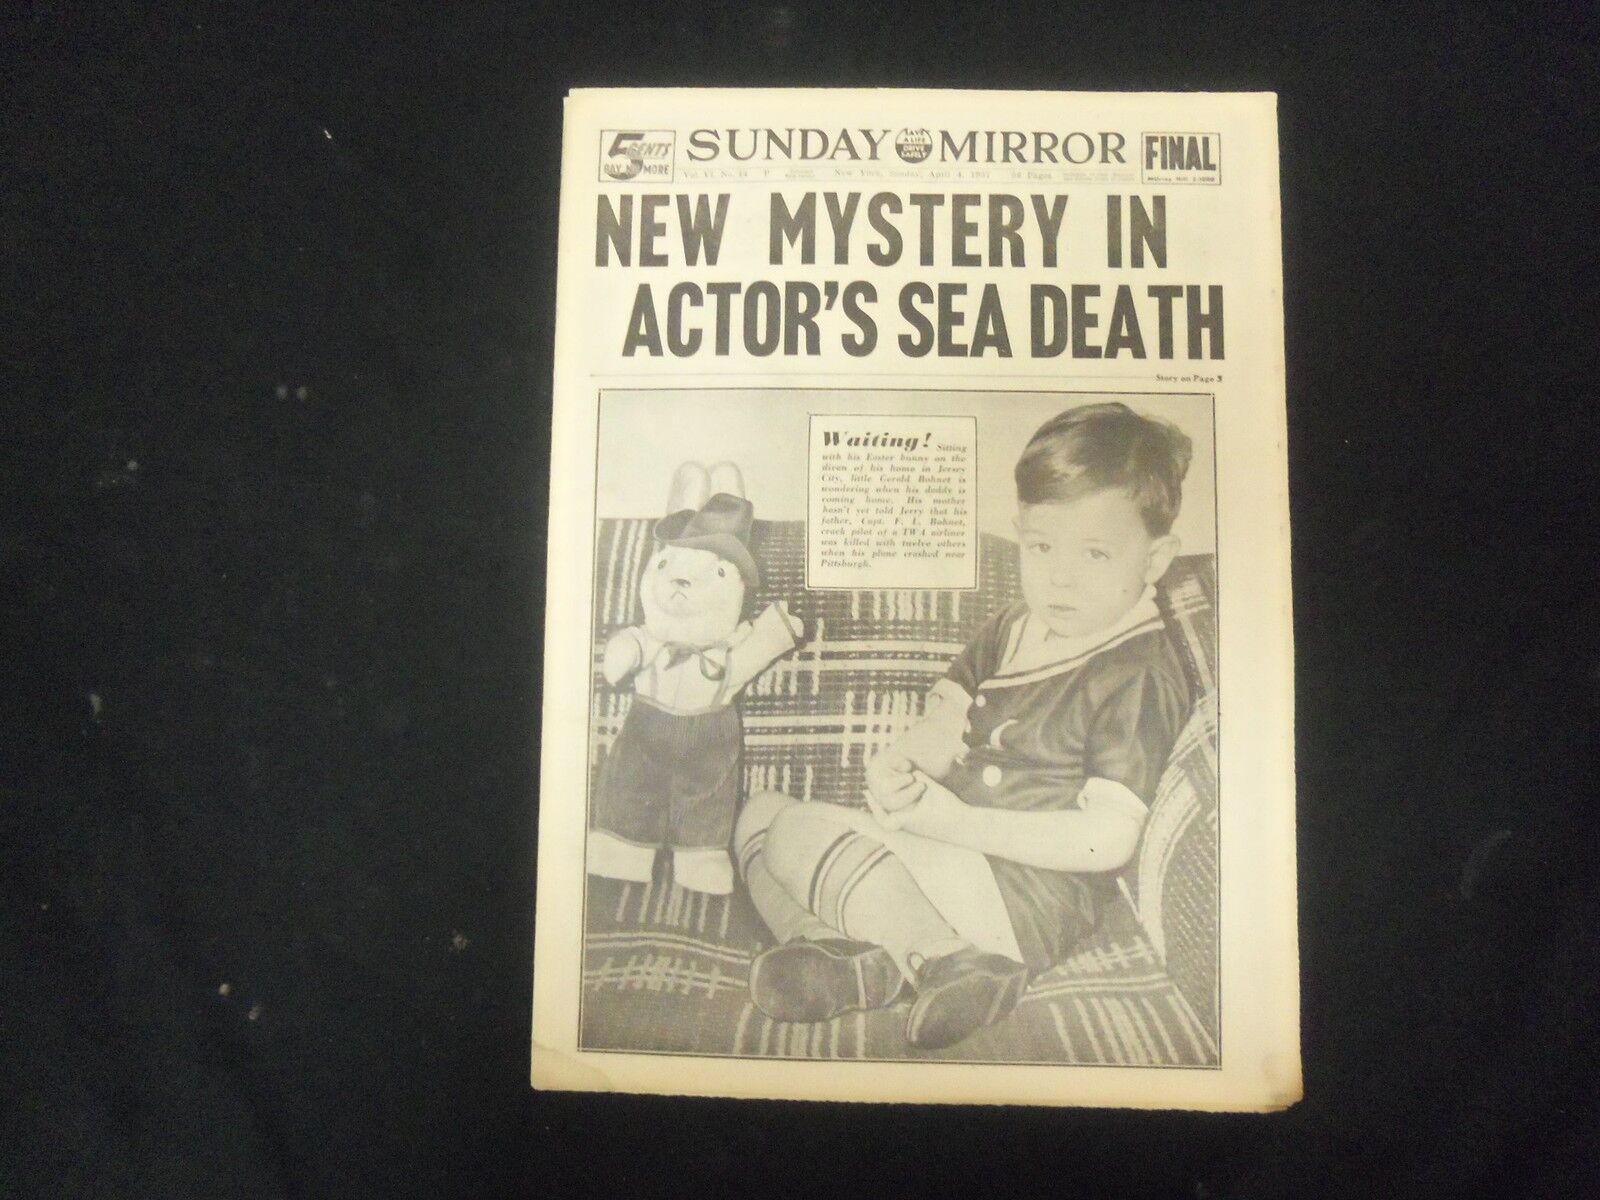 1937 APRIL 4 NEW YORK SUNDAY MIRROR - NEW MYSTERY IN ACTOR'S SEA DEATH - NP 2322